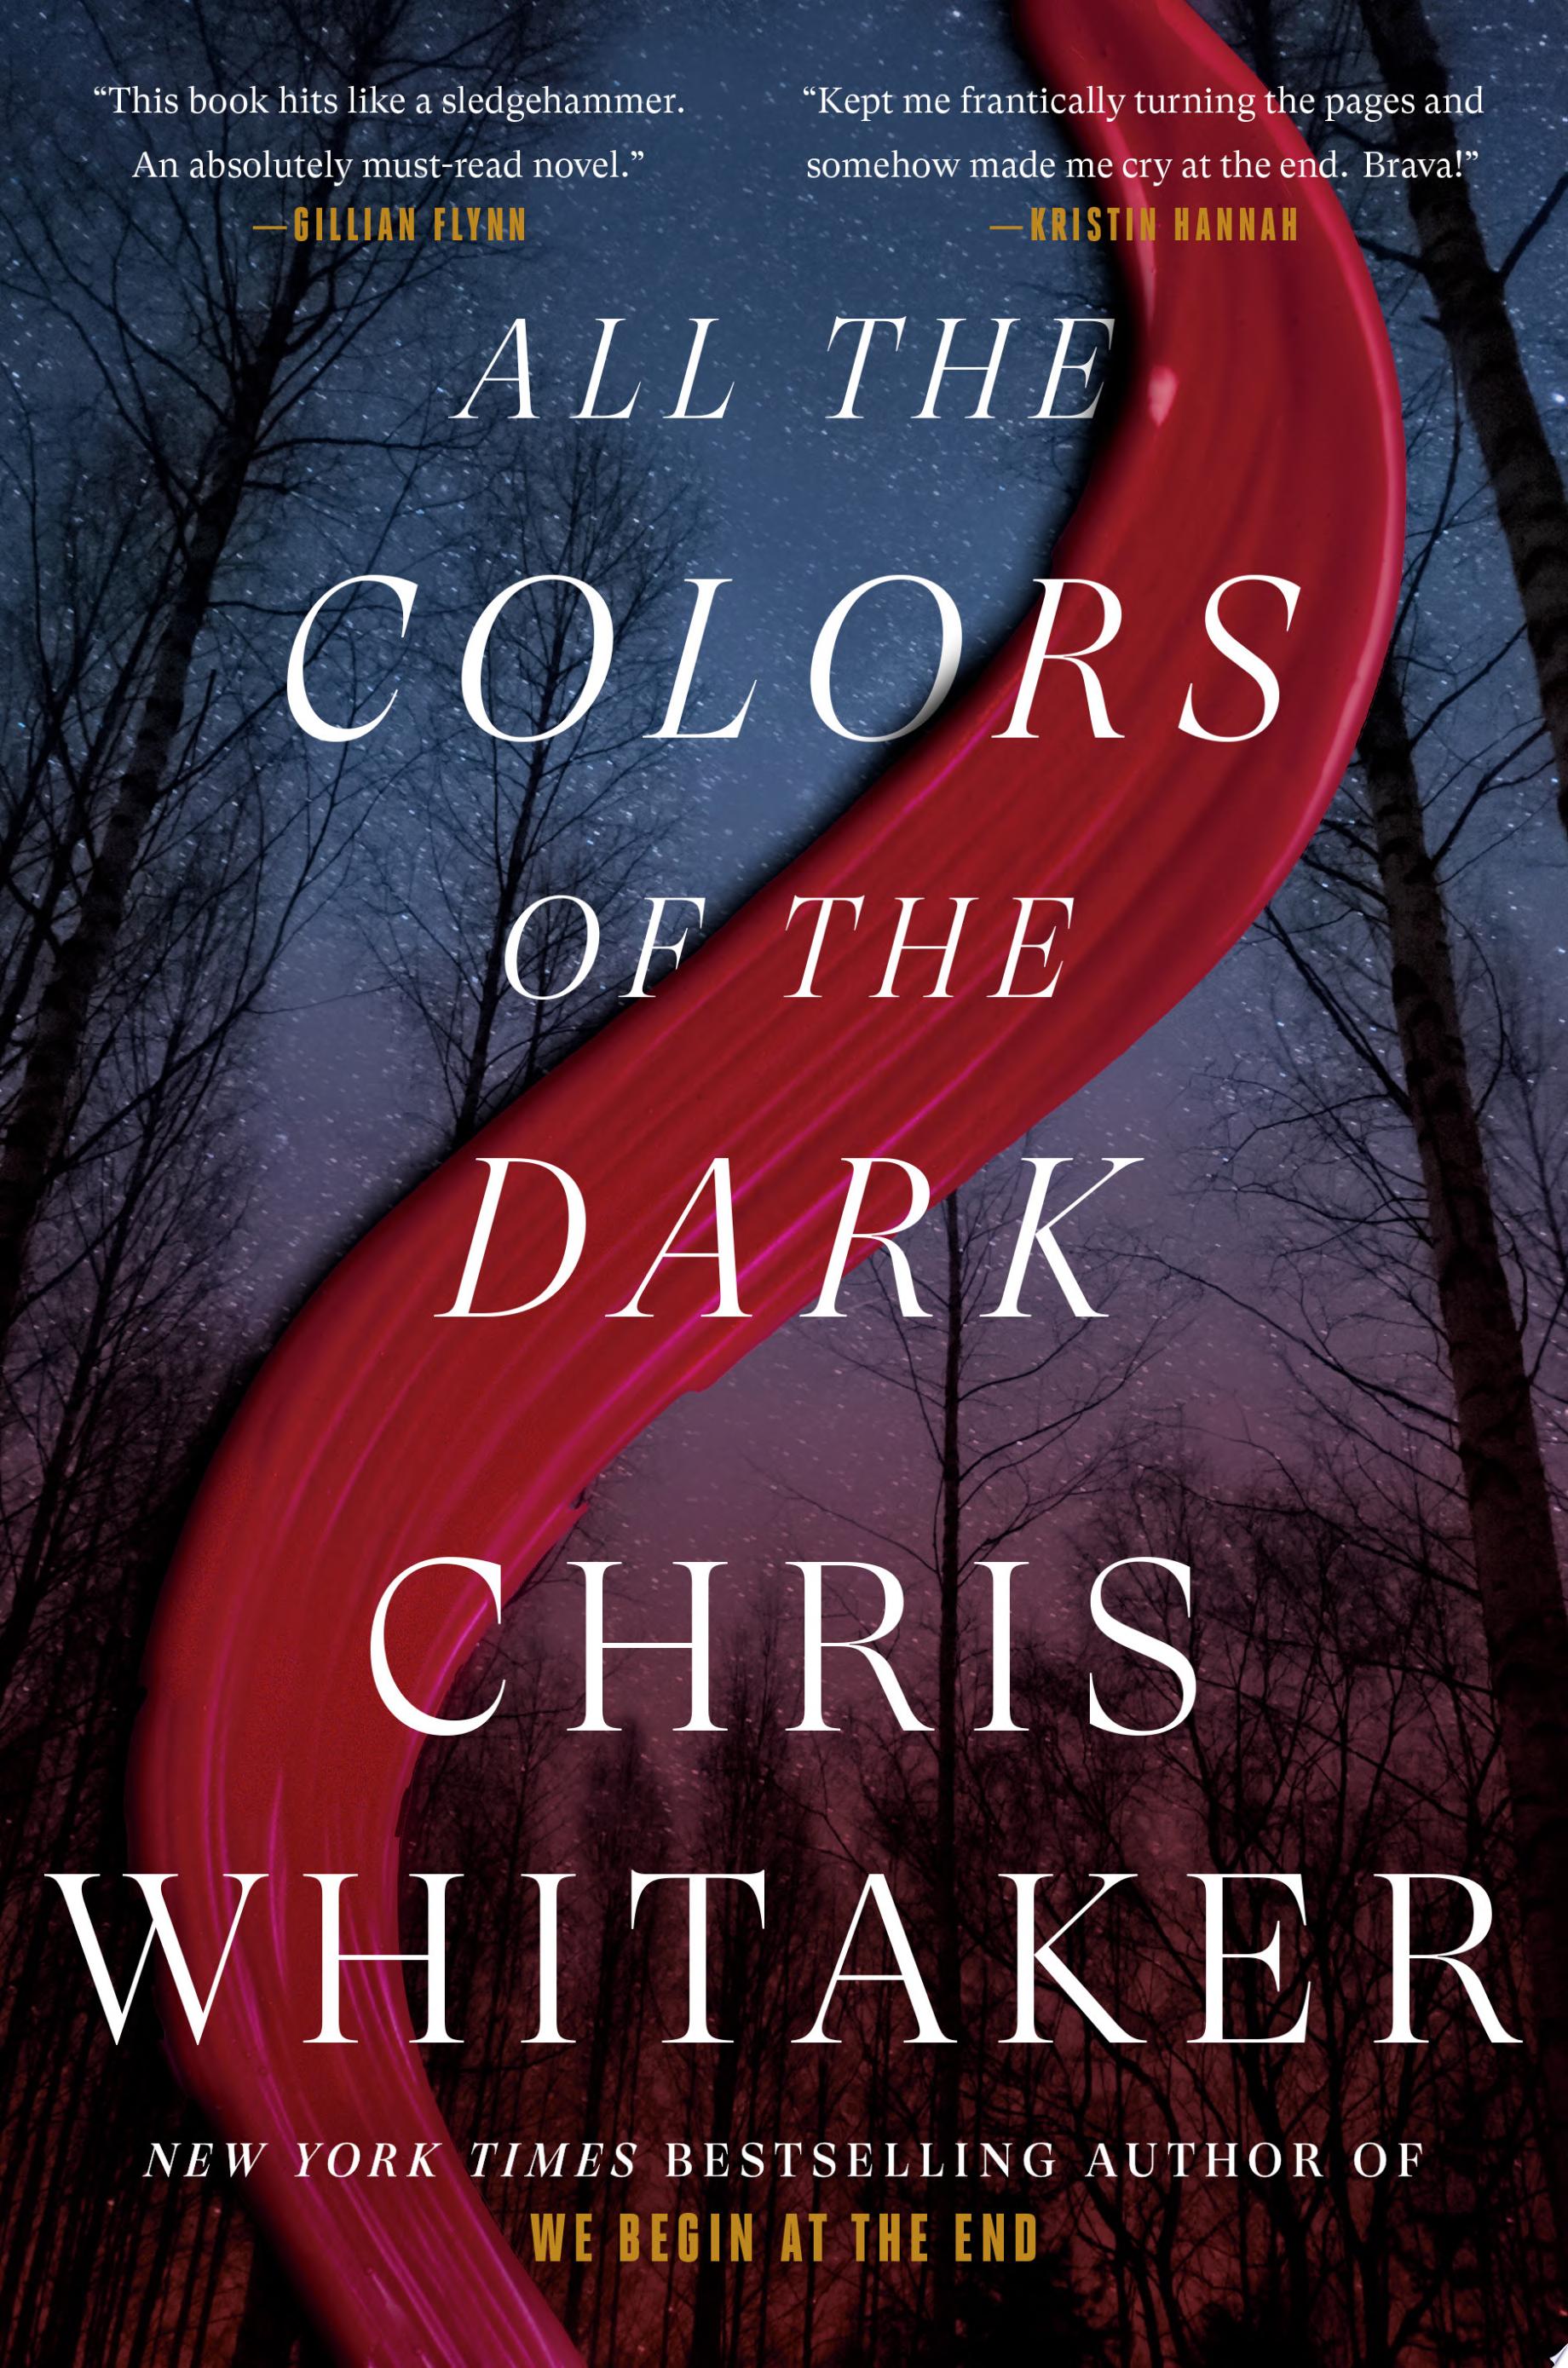 Image for "All the Colors of the Dark"